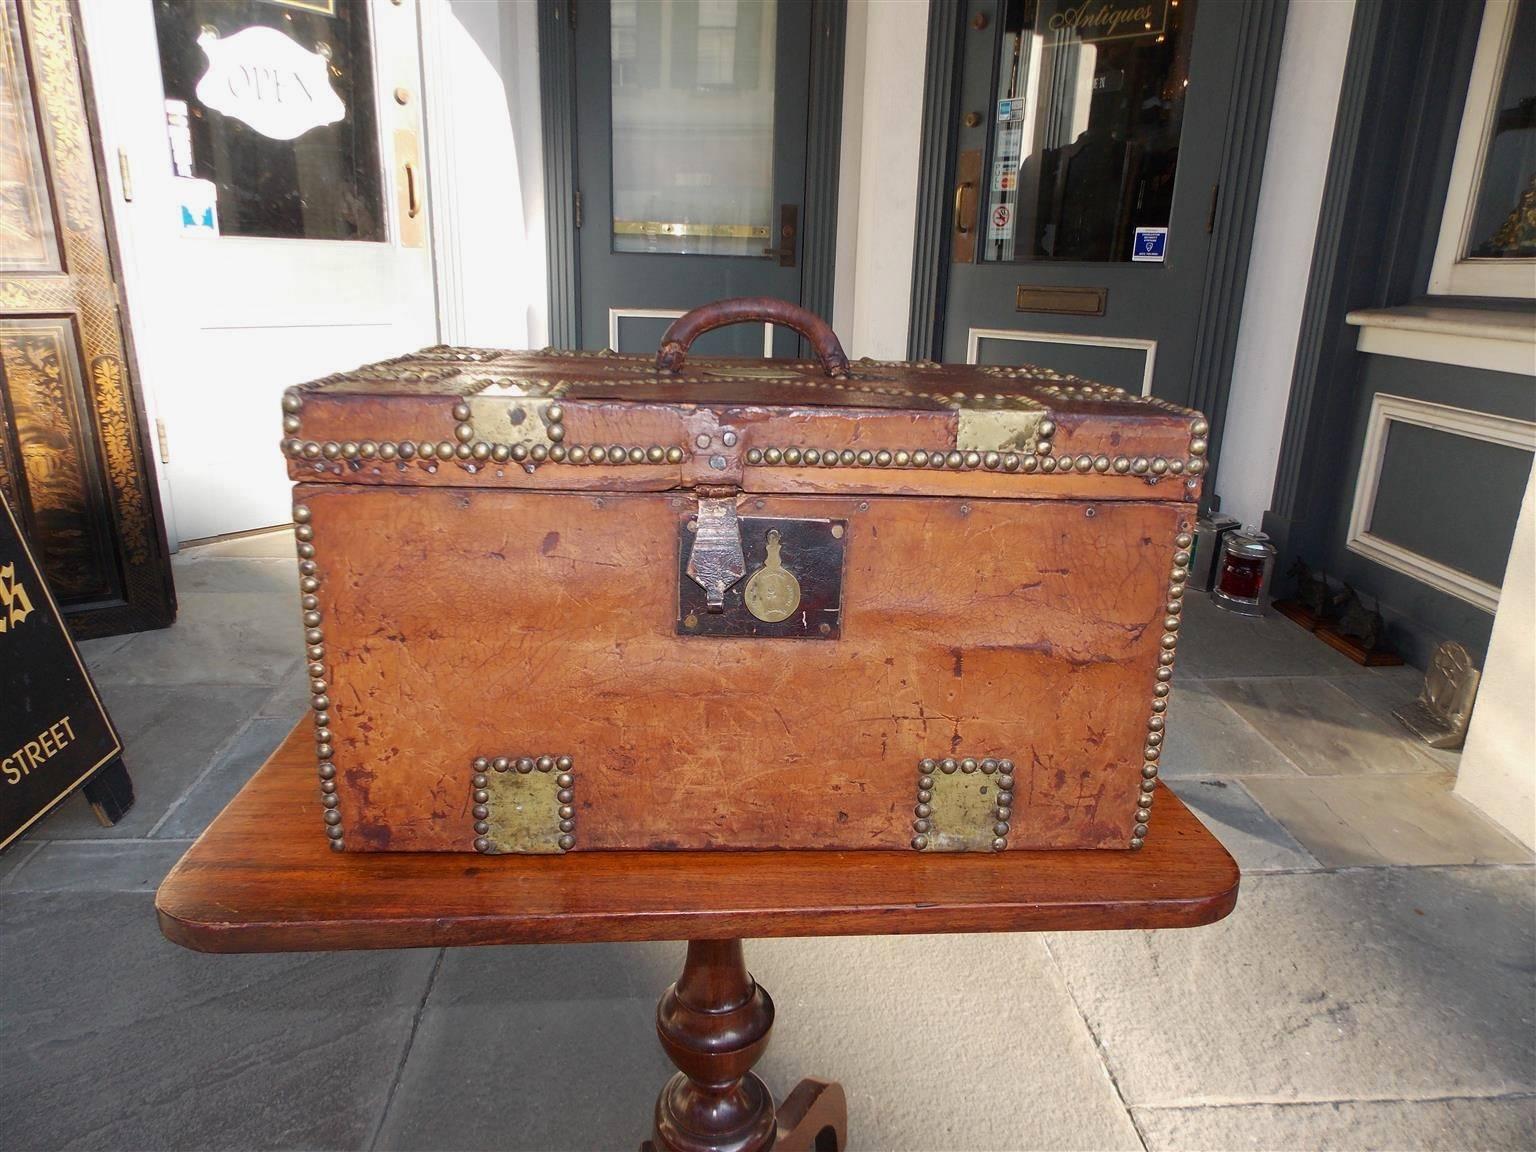 American leather wharf chest with exterior brass mounts, brass studs, carrying handle, stamped locking mechanism and the original paper lined interior. Engraved on lid Boston Wharf Company, Mid-19th Century.